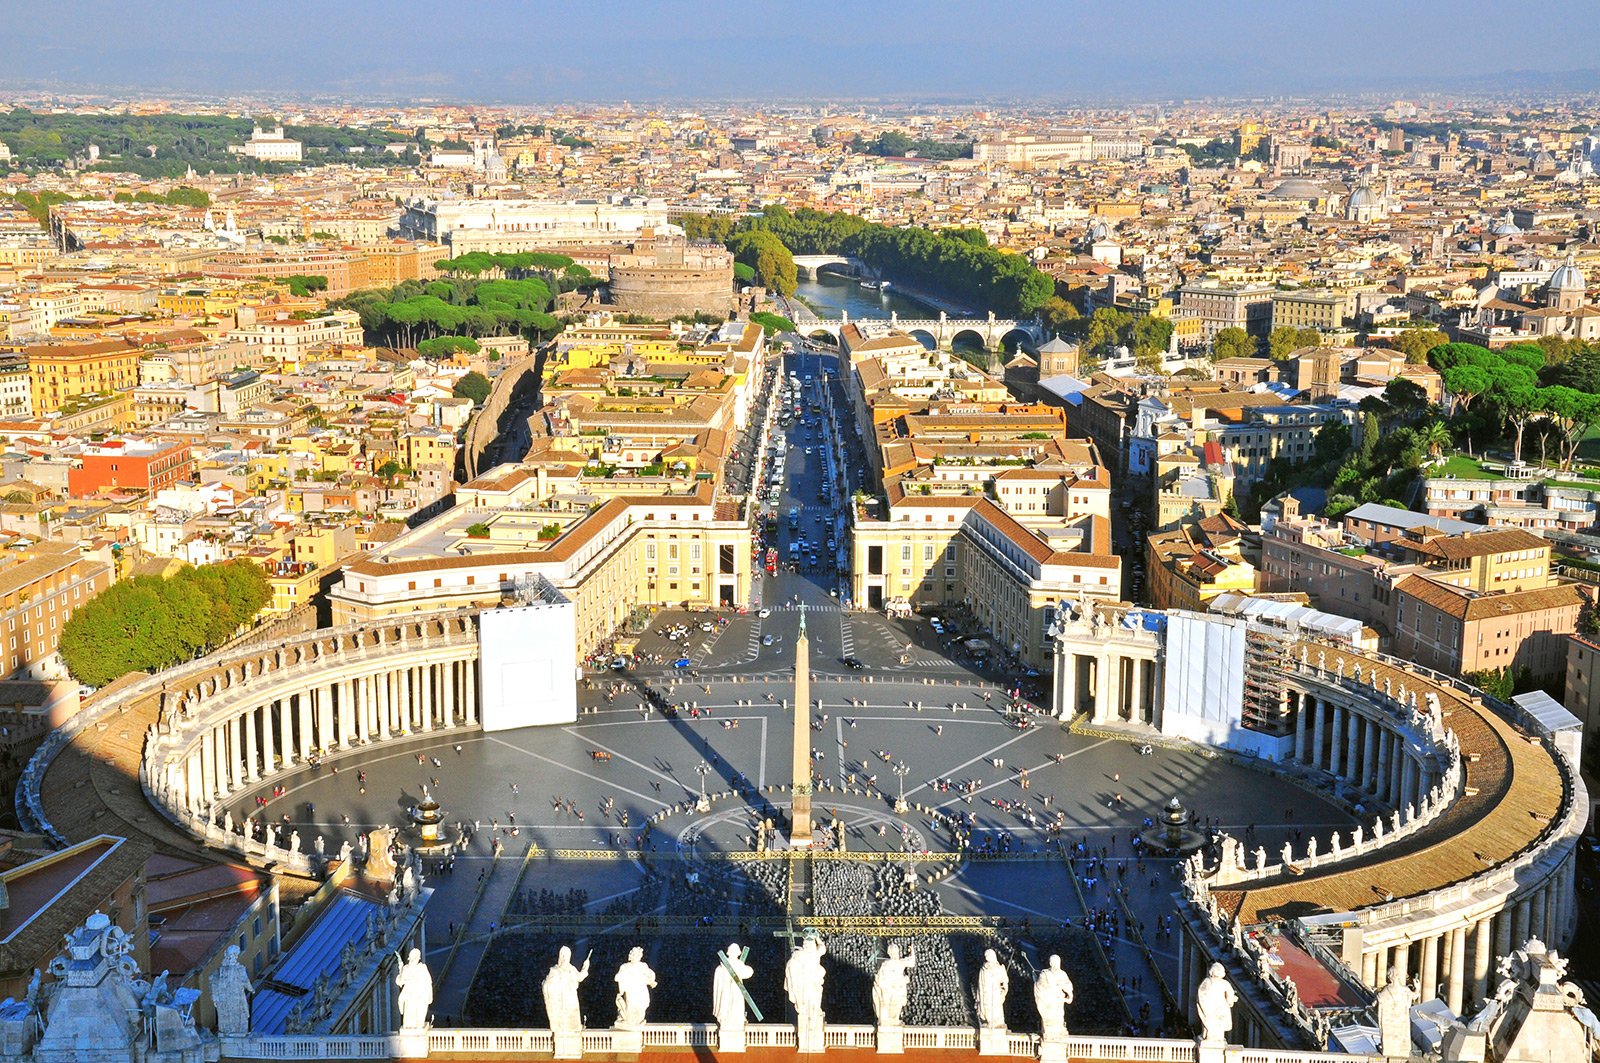 How to look at Rome and Vatican City from the top of St. Peter’s Basilica in Vatican